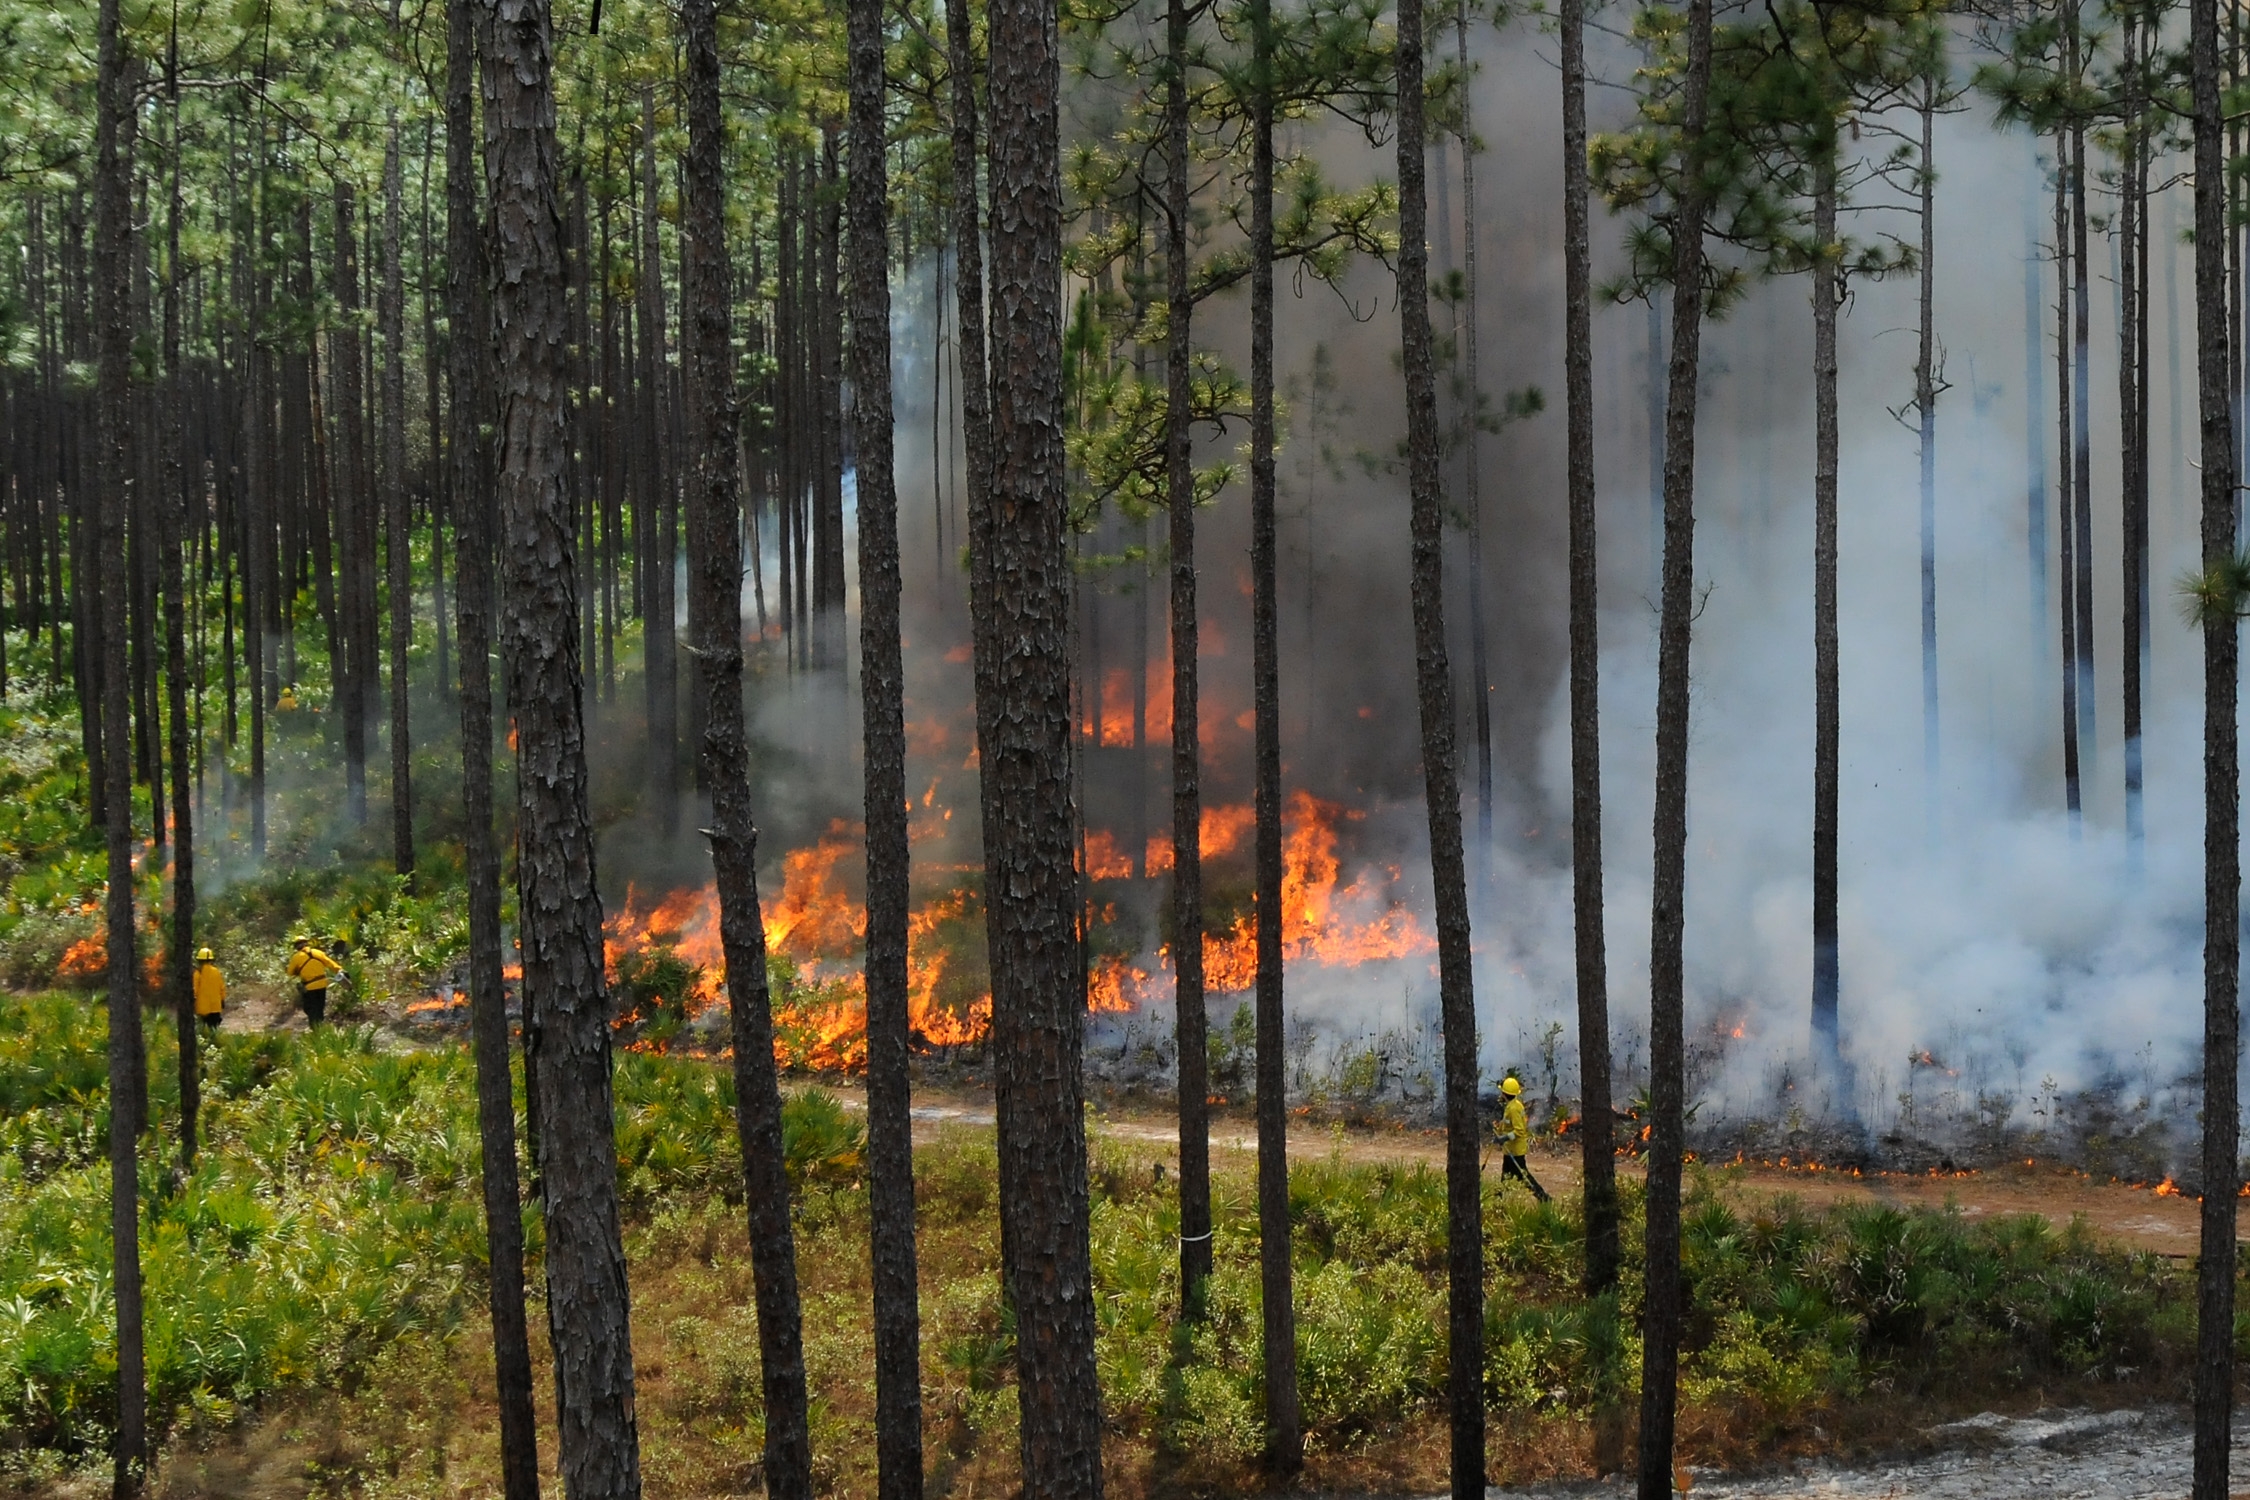 Prescribed fire taking place in the Austin Cary Memorial Forest. 